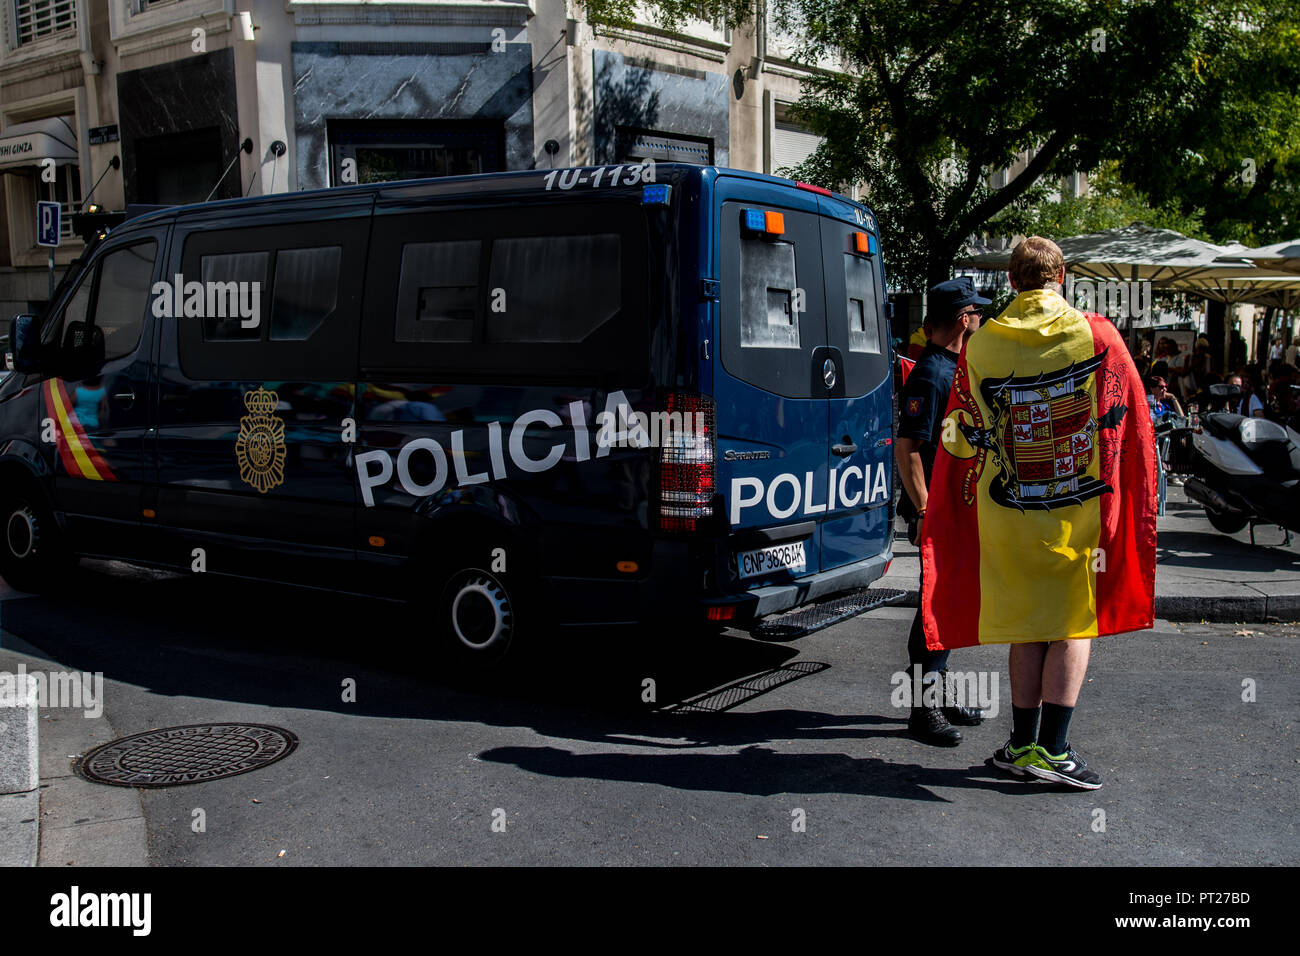 Madrid, Spain. 6th October, 2018. A man with a a francoist flag speaking with police during a demonstration demanding resignation of President Pedro Sanchez and calling for the union of Spain in the independence process of Catalonia, in Madrid, Spain. Credit: Marcos del Mazo/Alamy Live News Stock Photo